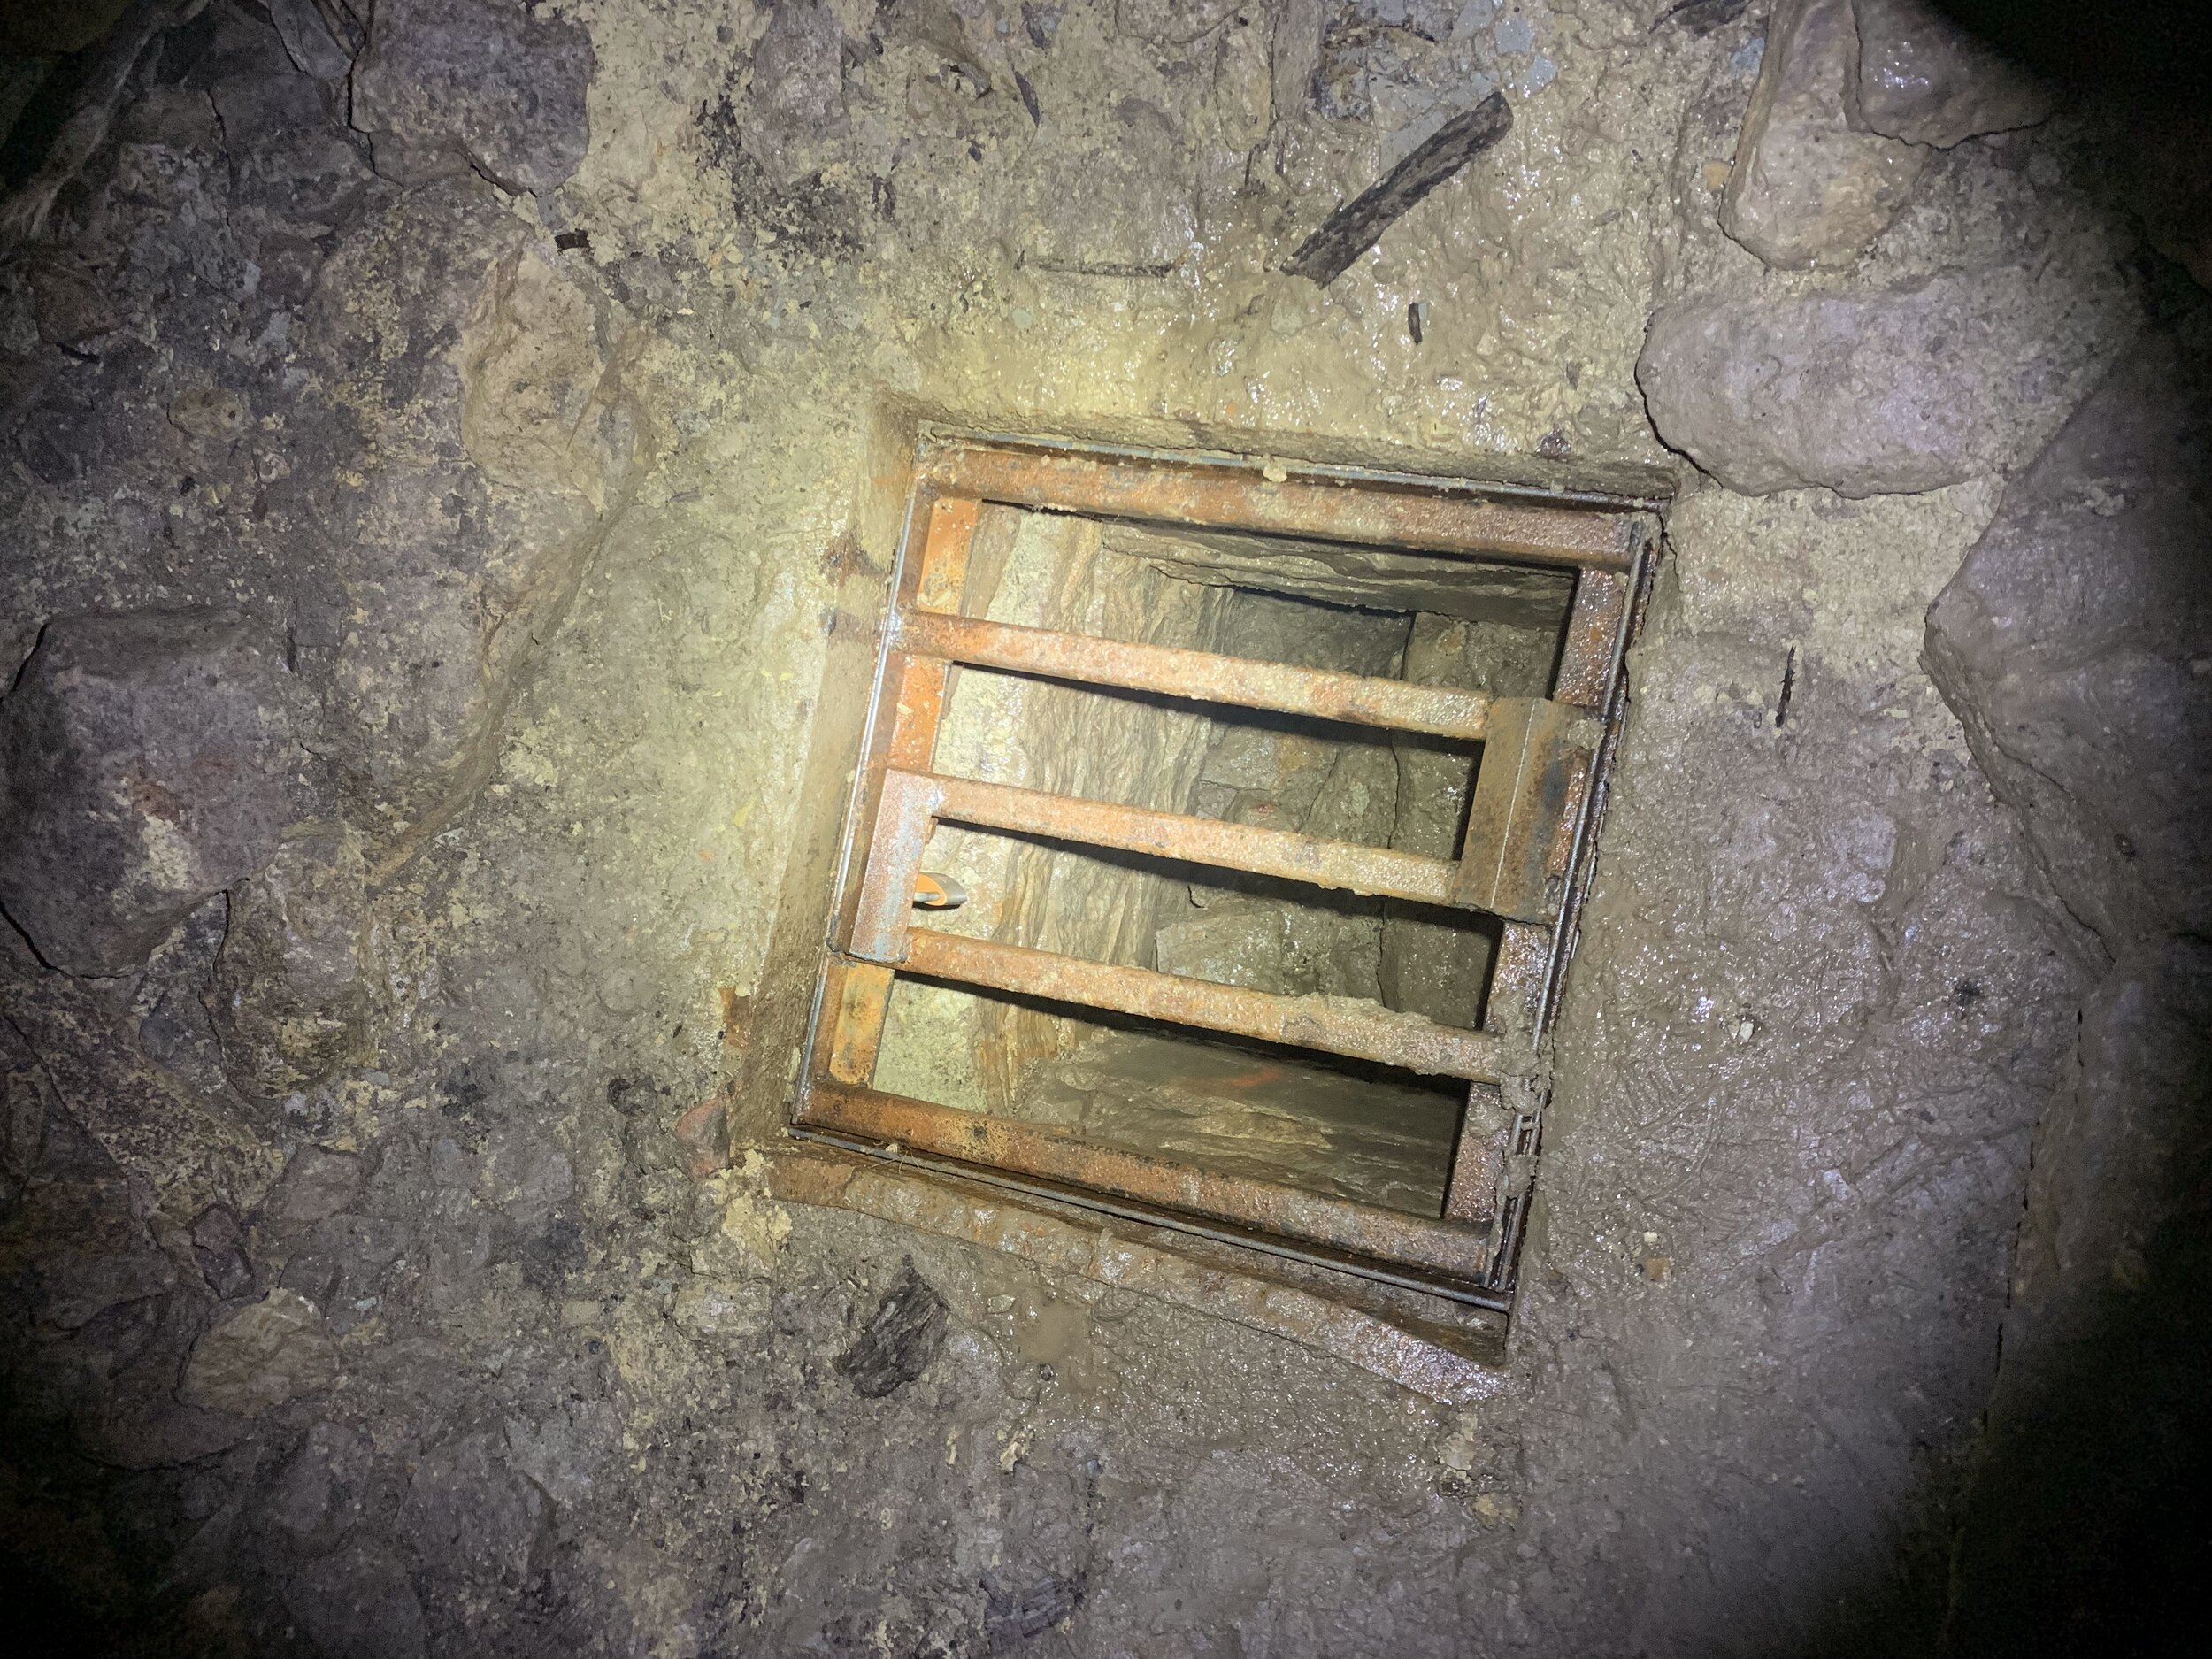 This Welded Metal Grate Covers the Actual Cave Entrance, Preventing Entry